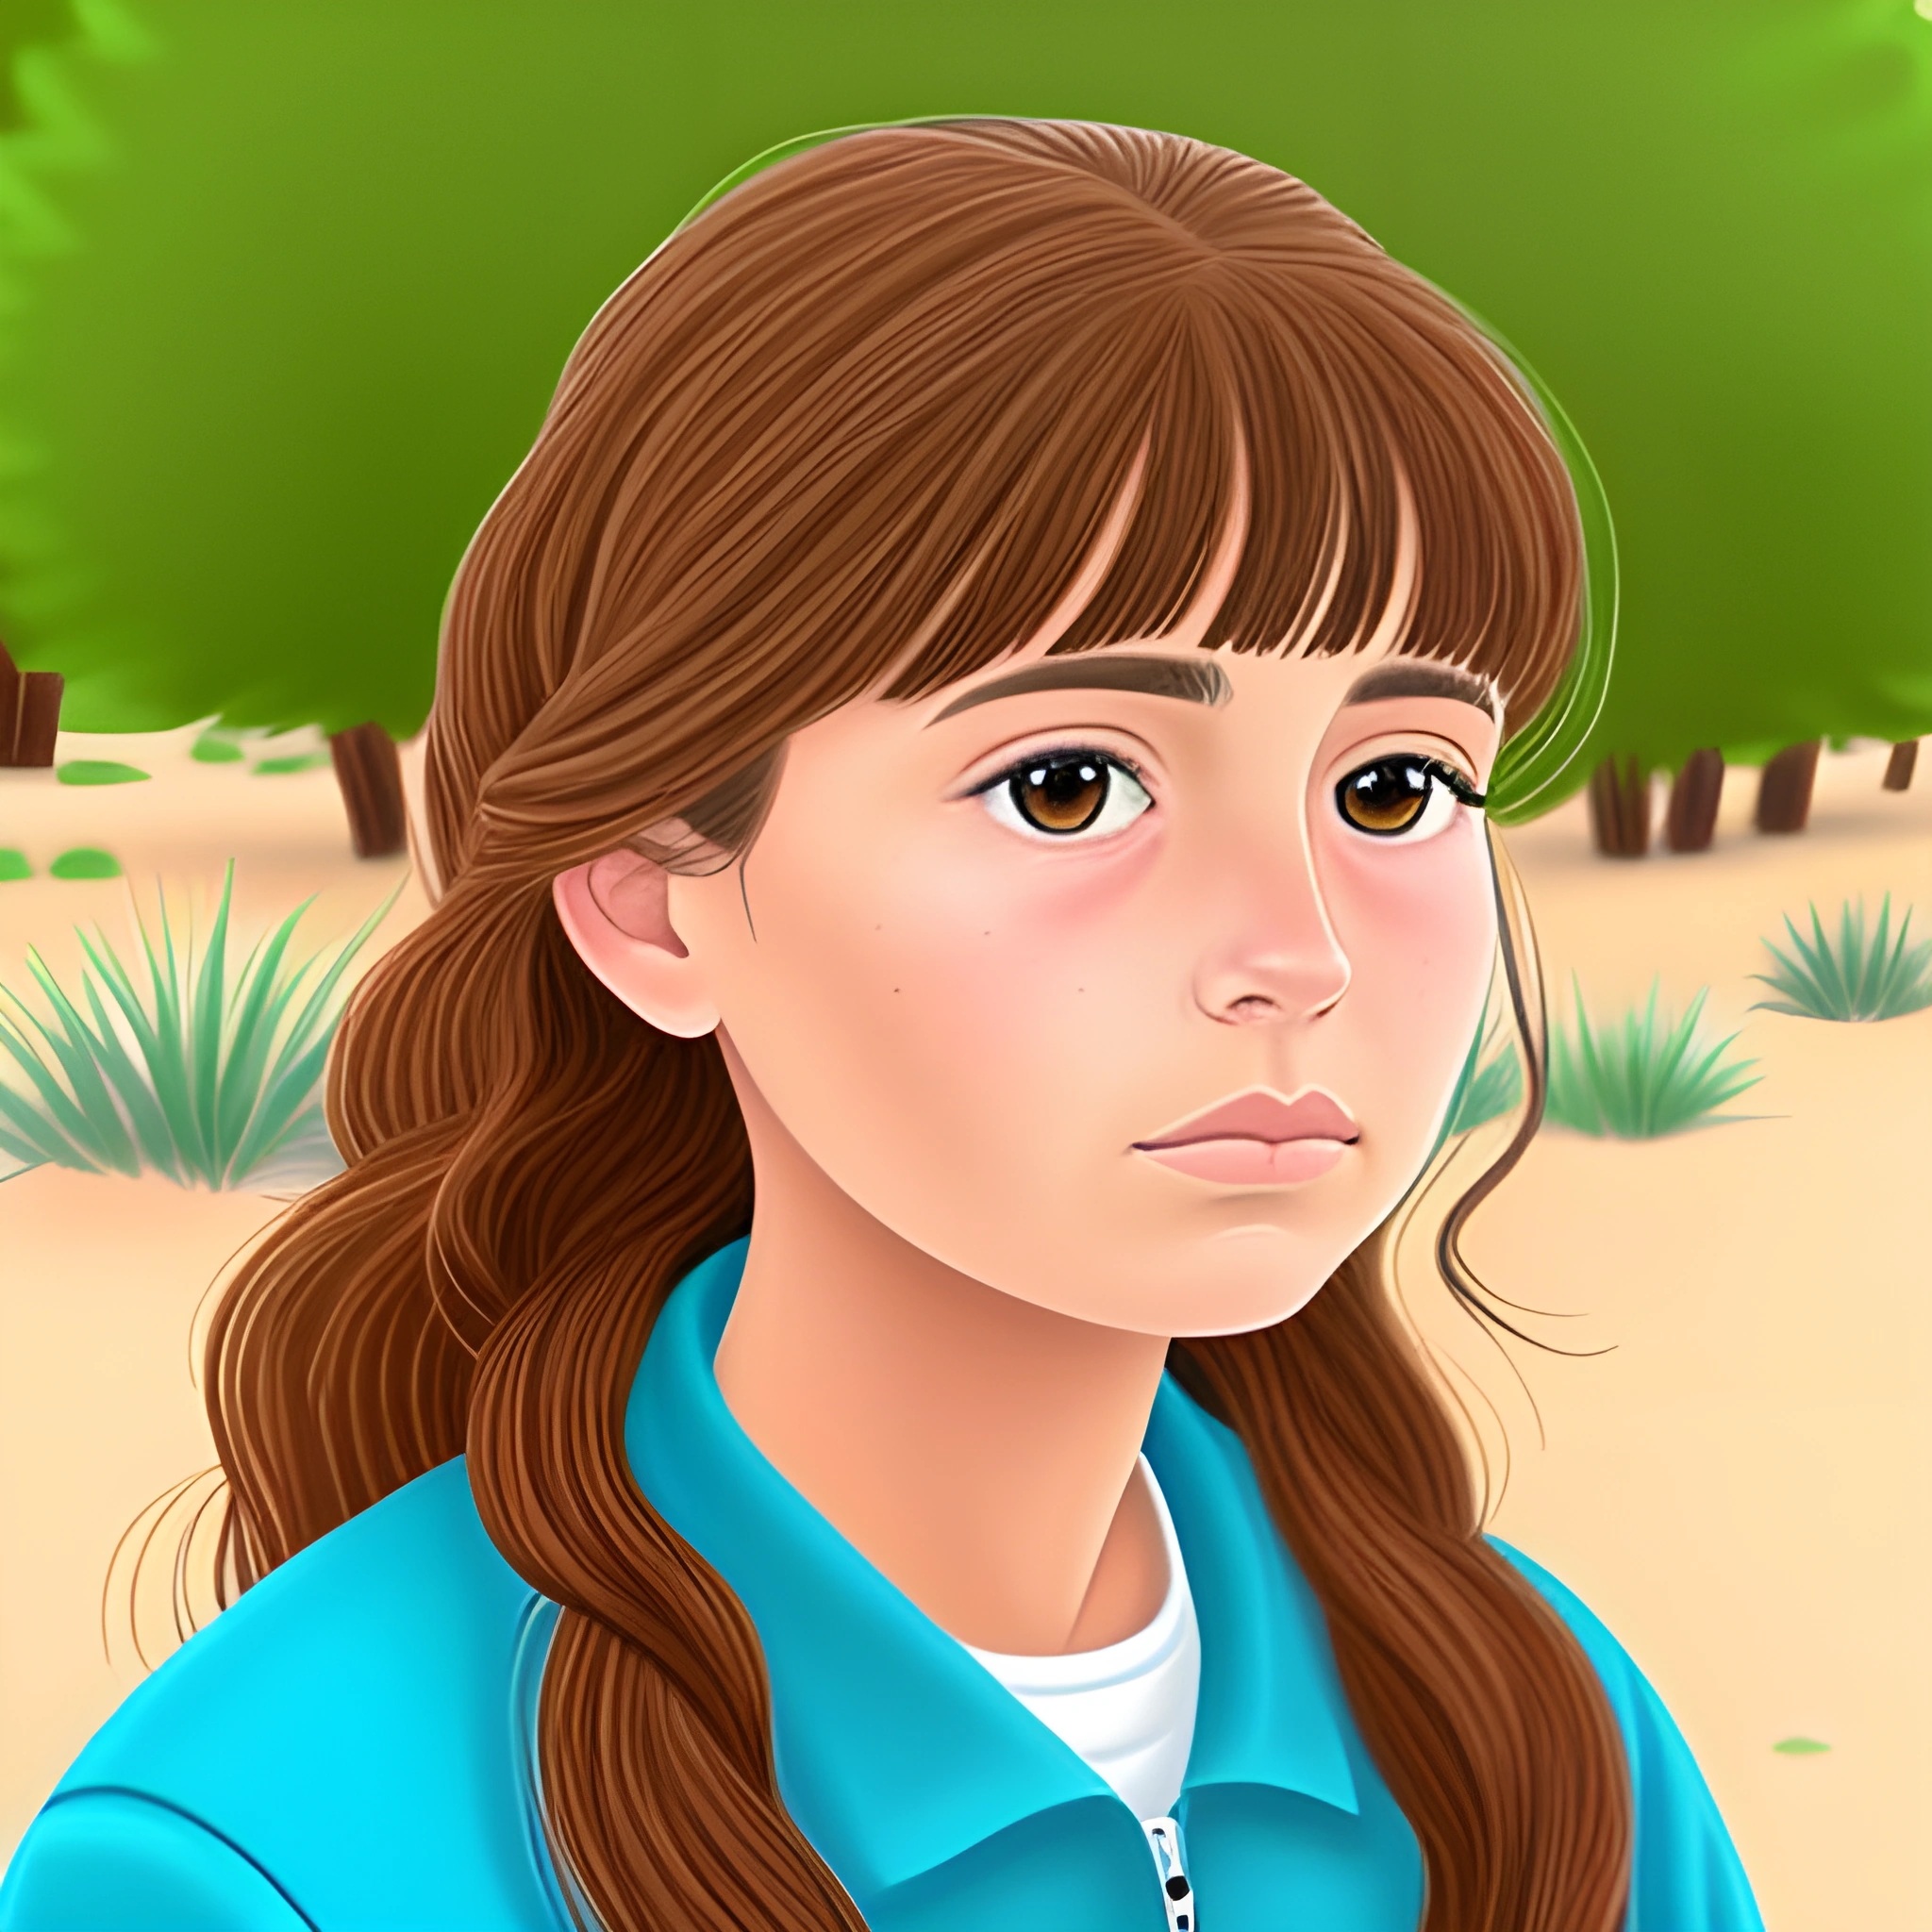 cartoon girl with long brown hair and blue shirt in a desert area